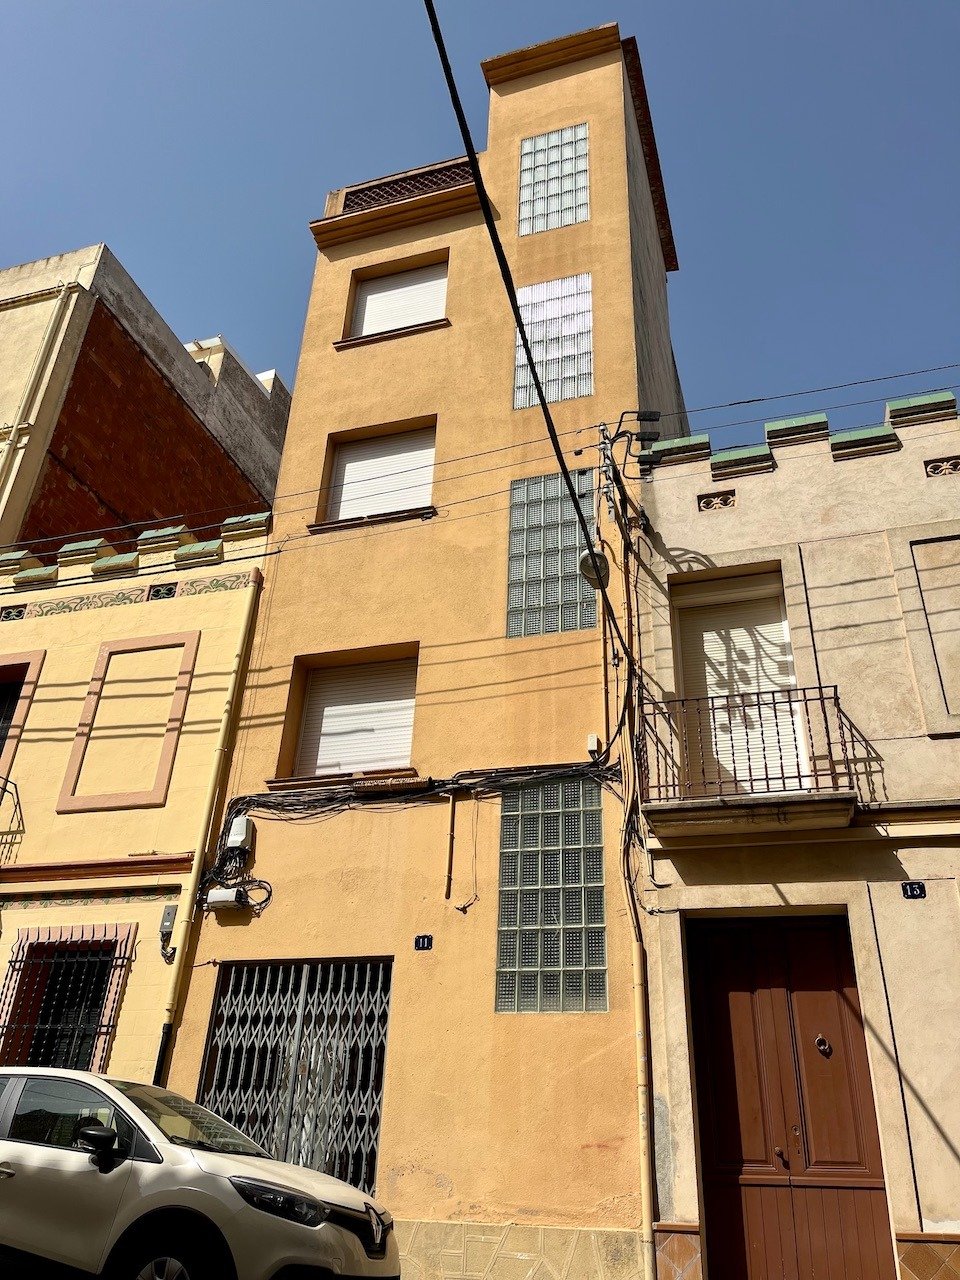 House For sale Calella